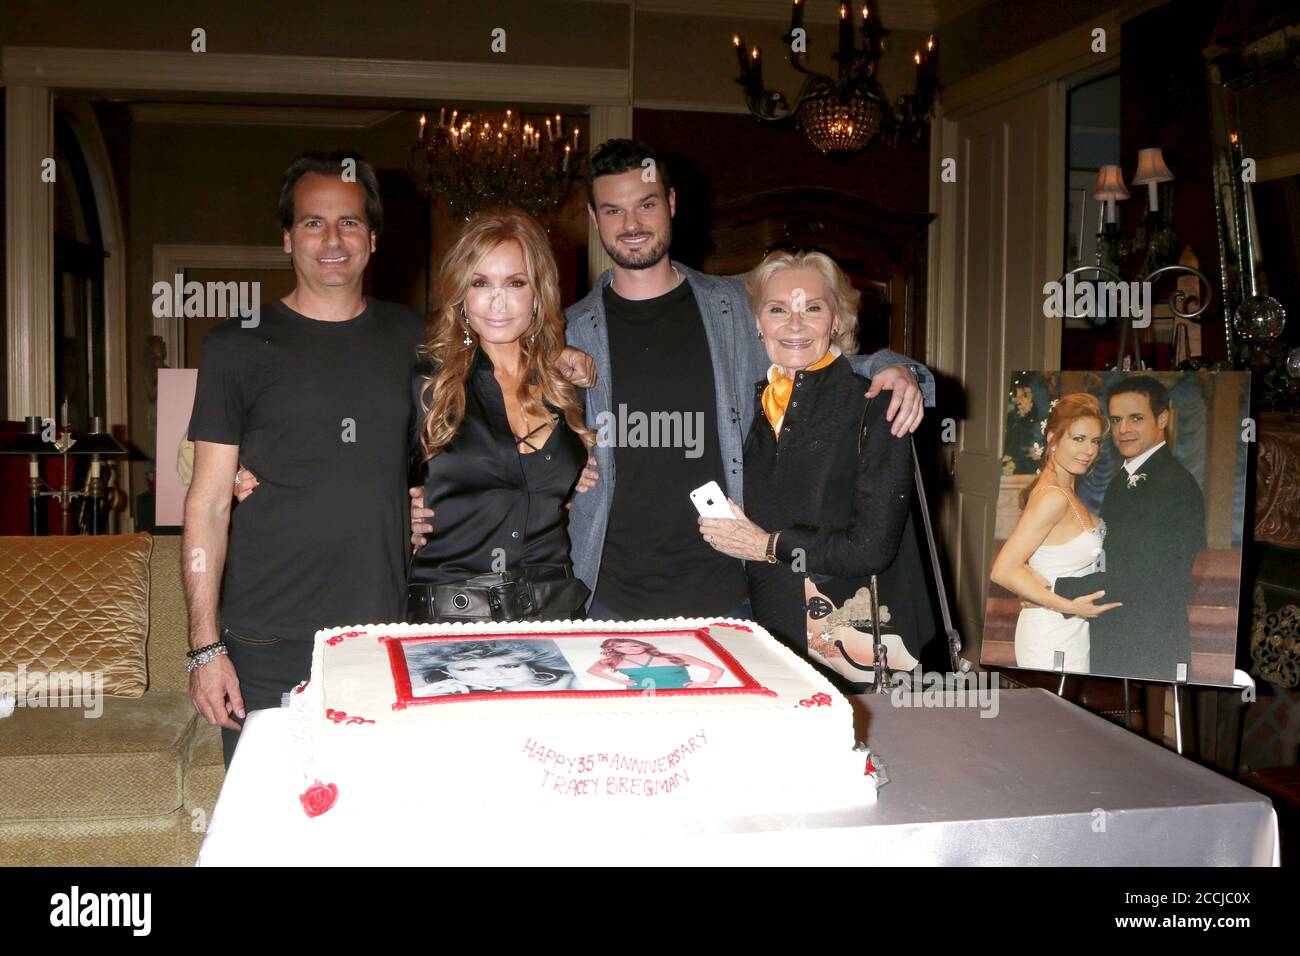 LOS ANGELES - FEB 2:  Ari Soffer, Tracey Bregman, Austin Recht, Suzanne Ll at the Tracey Bregman 35th Anniversary on the Young and the Restless at CBS TV City on February 2, 2018 in Los Angeles, CA Stock Photo